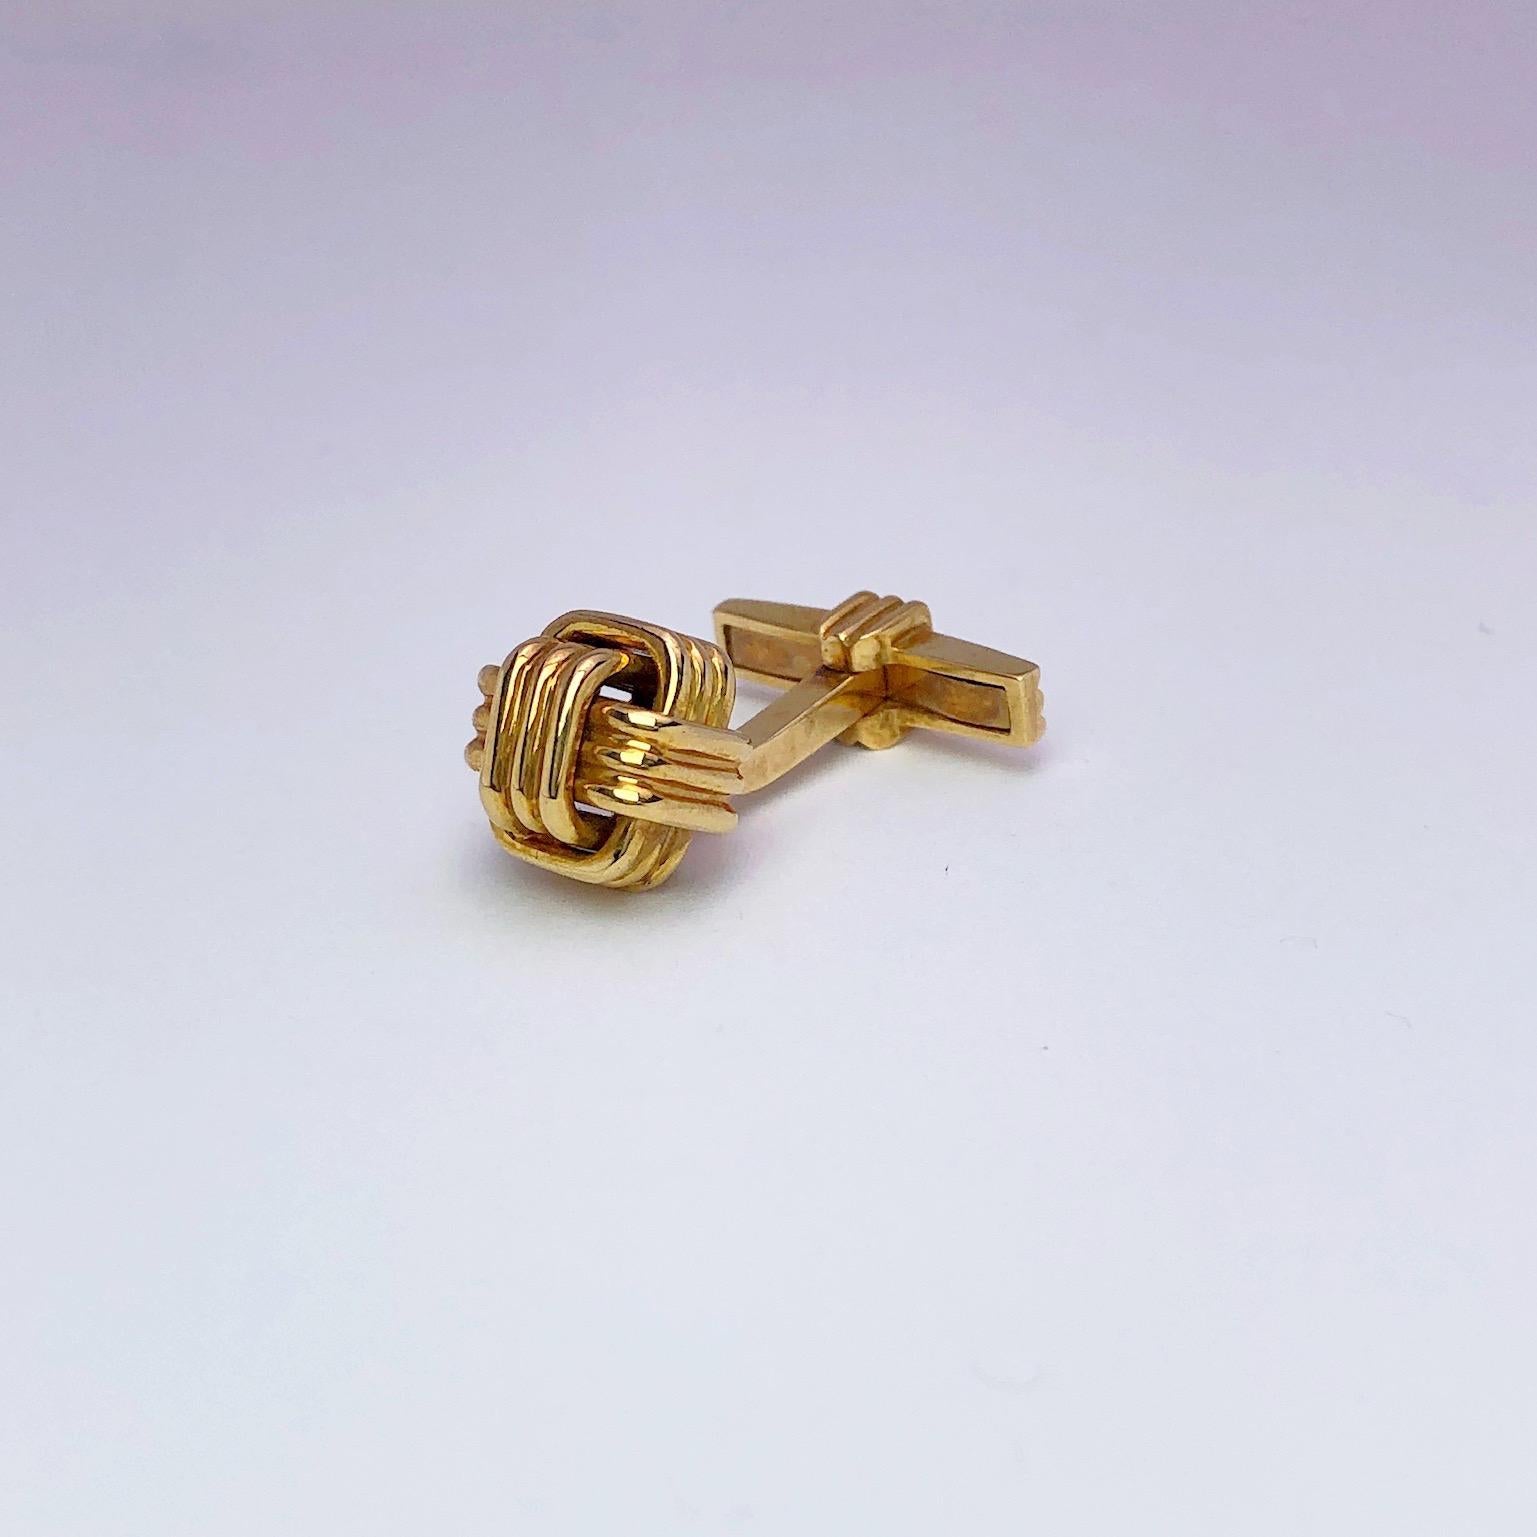 Classic 18 karat yellow gold knot cufflinks designed with a monkey's fist knot and a collapsible back.
